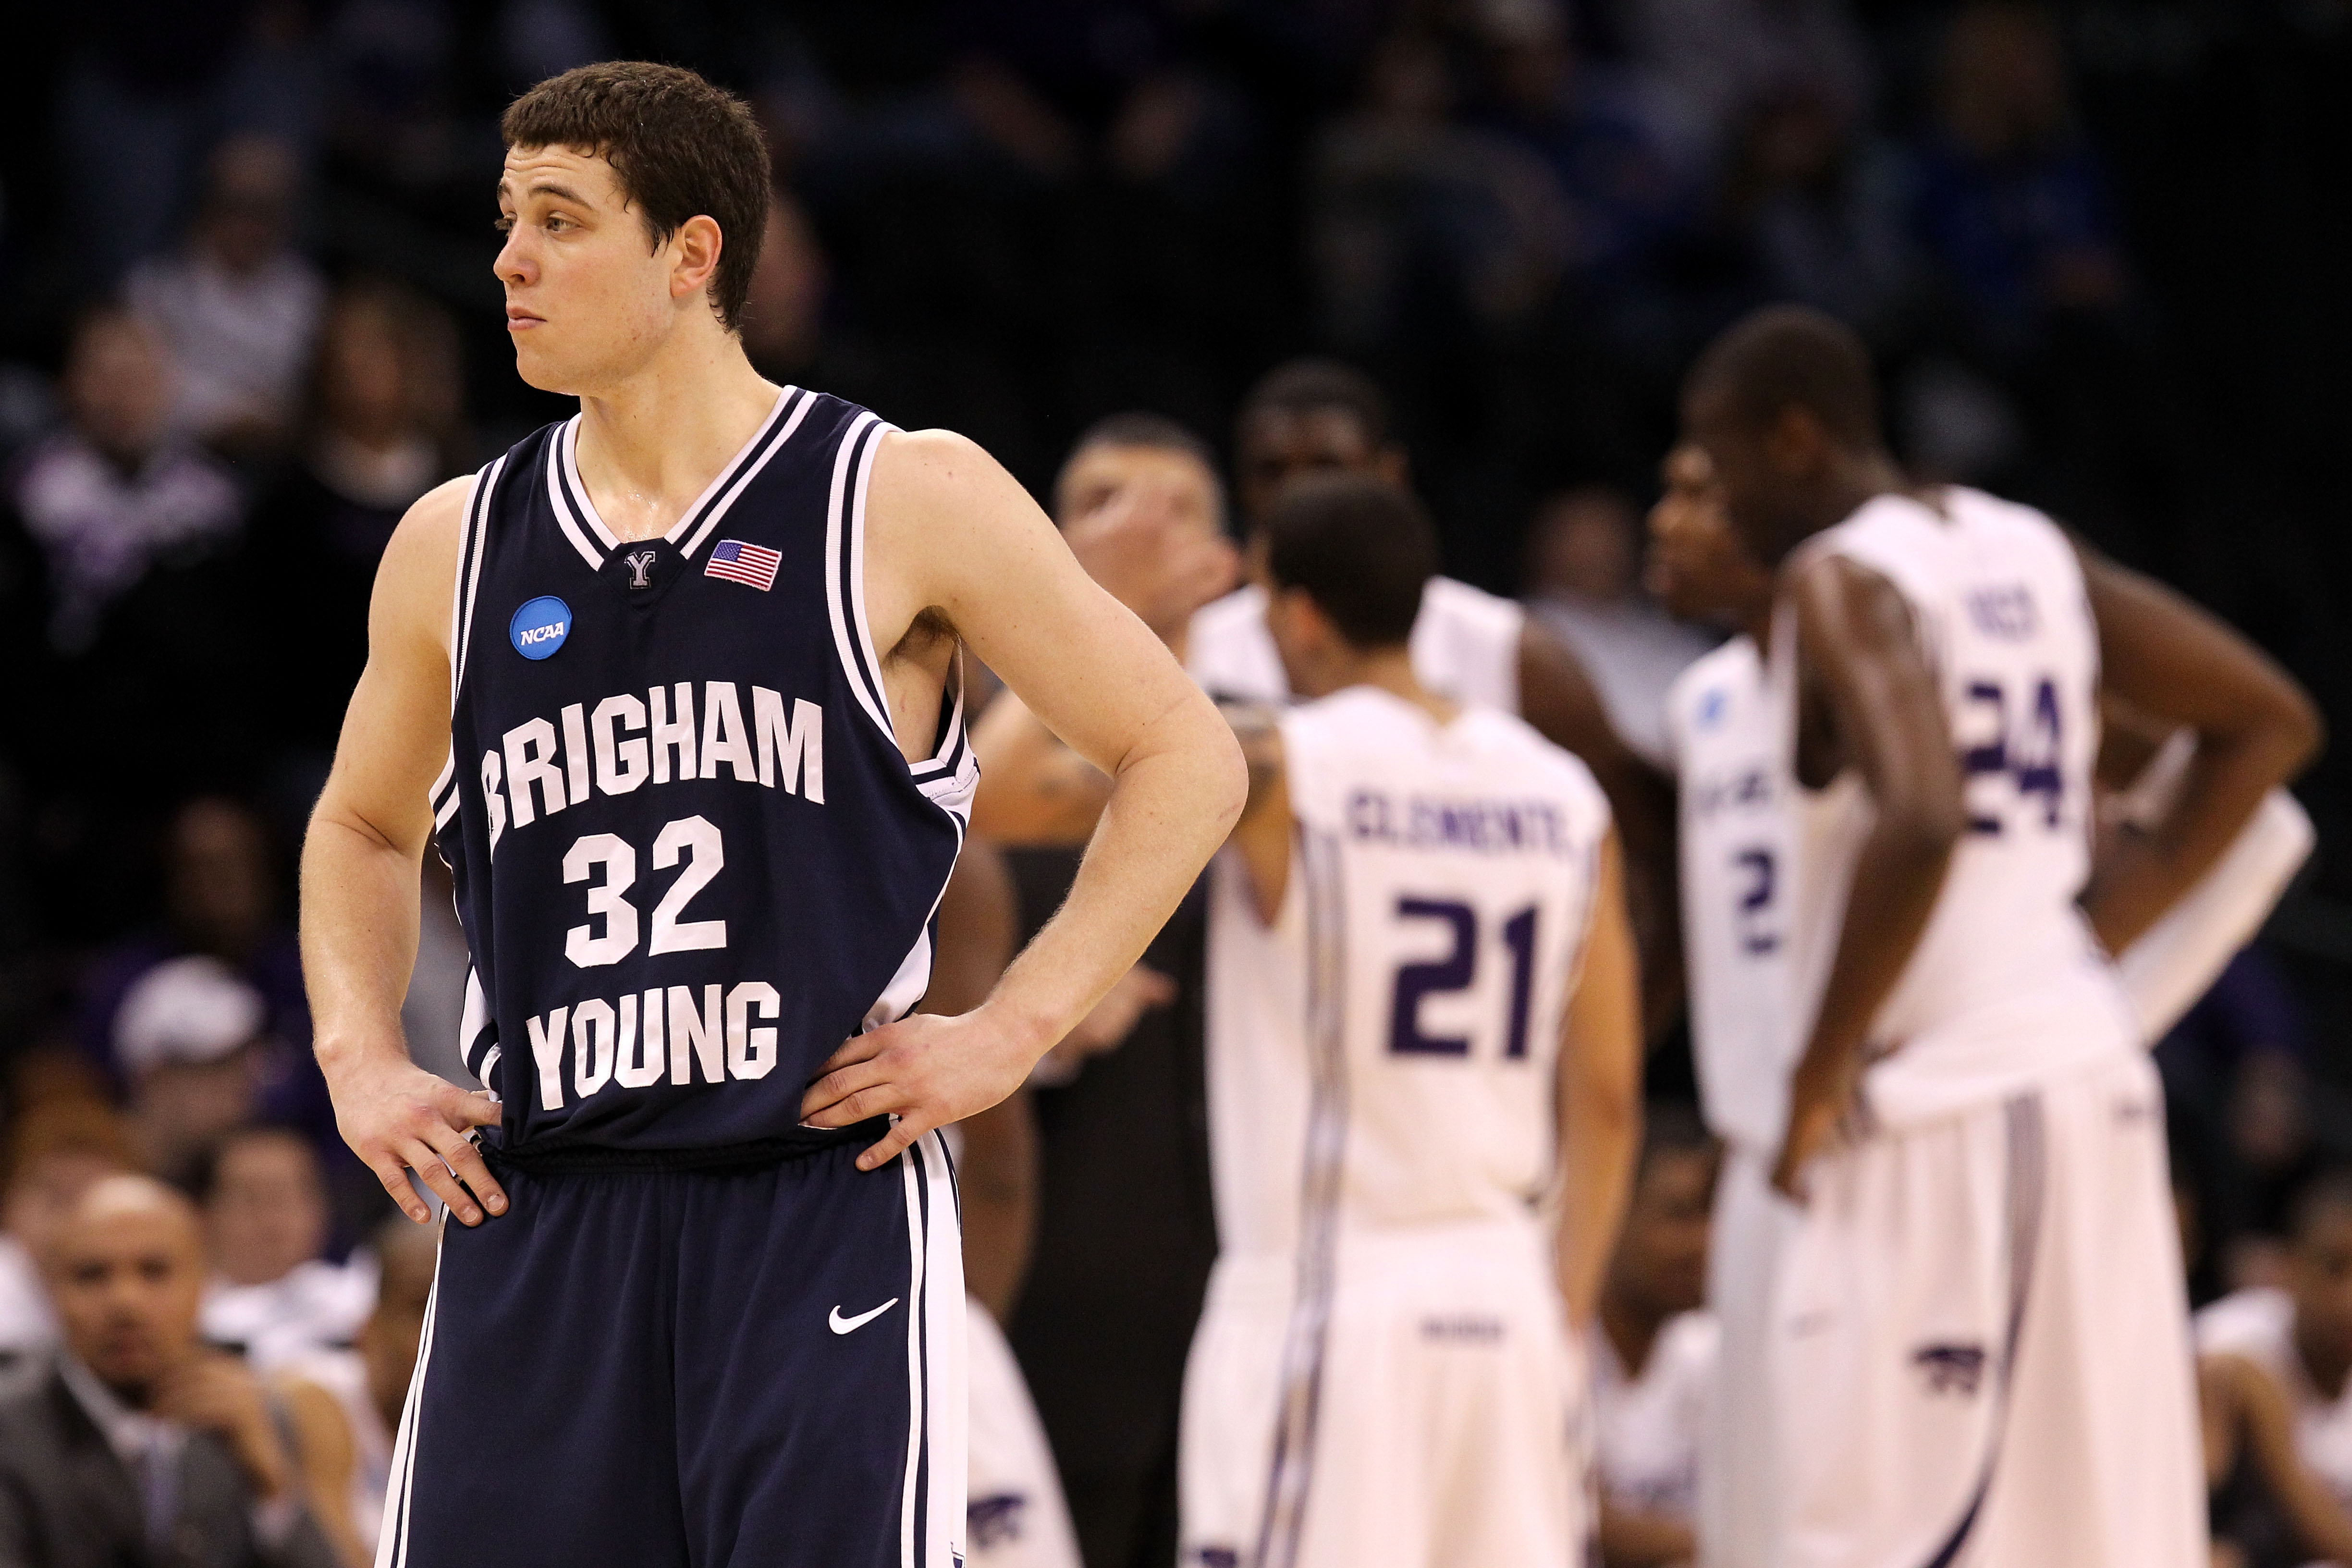 OKLAHOMA CITY - MARCH 20:  Jimmer Fredette #32 of the Brigham Young Cougars looks on as the Kansas State Wildcats huddle up in the background during the second round of the 2010 NCAA men's basketball tournament at Ford Center on March 20, 2010 in Oklahoma